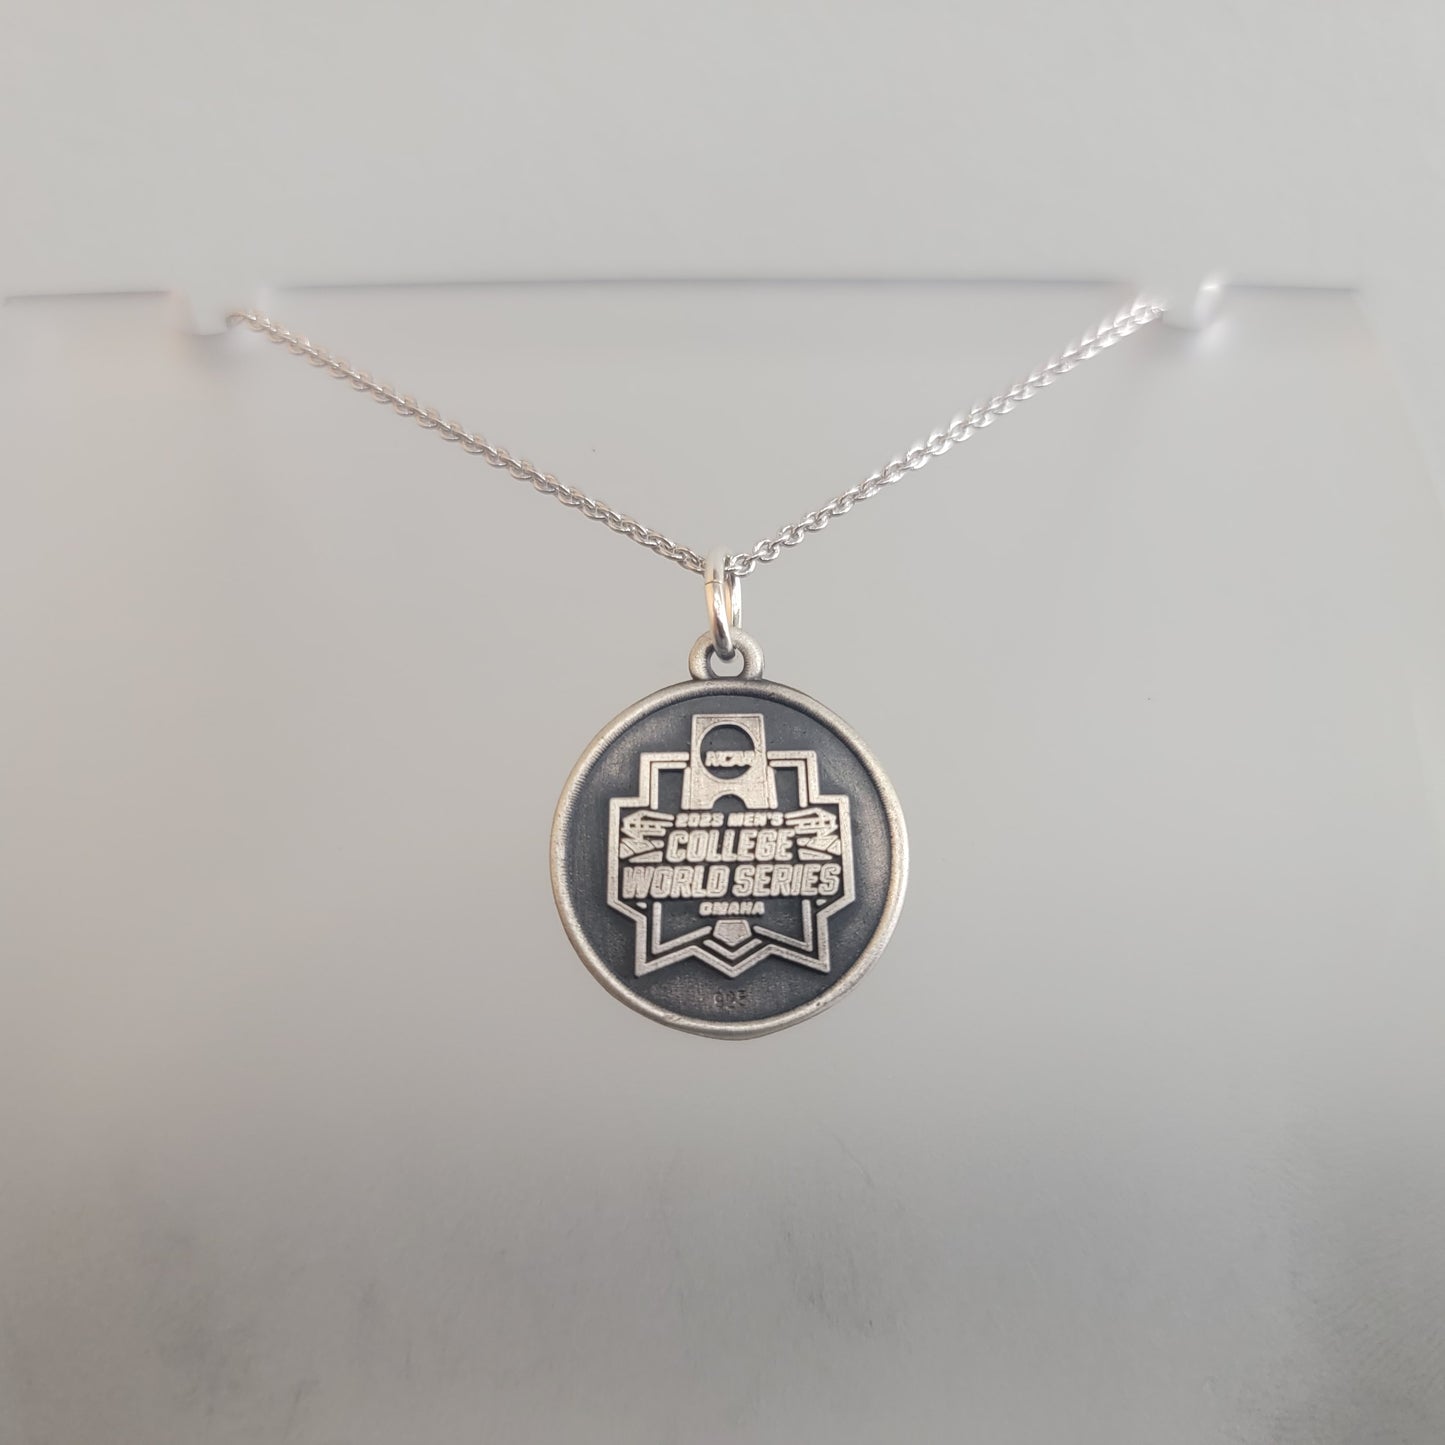 LSU - MCWS two sided pendant